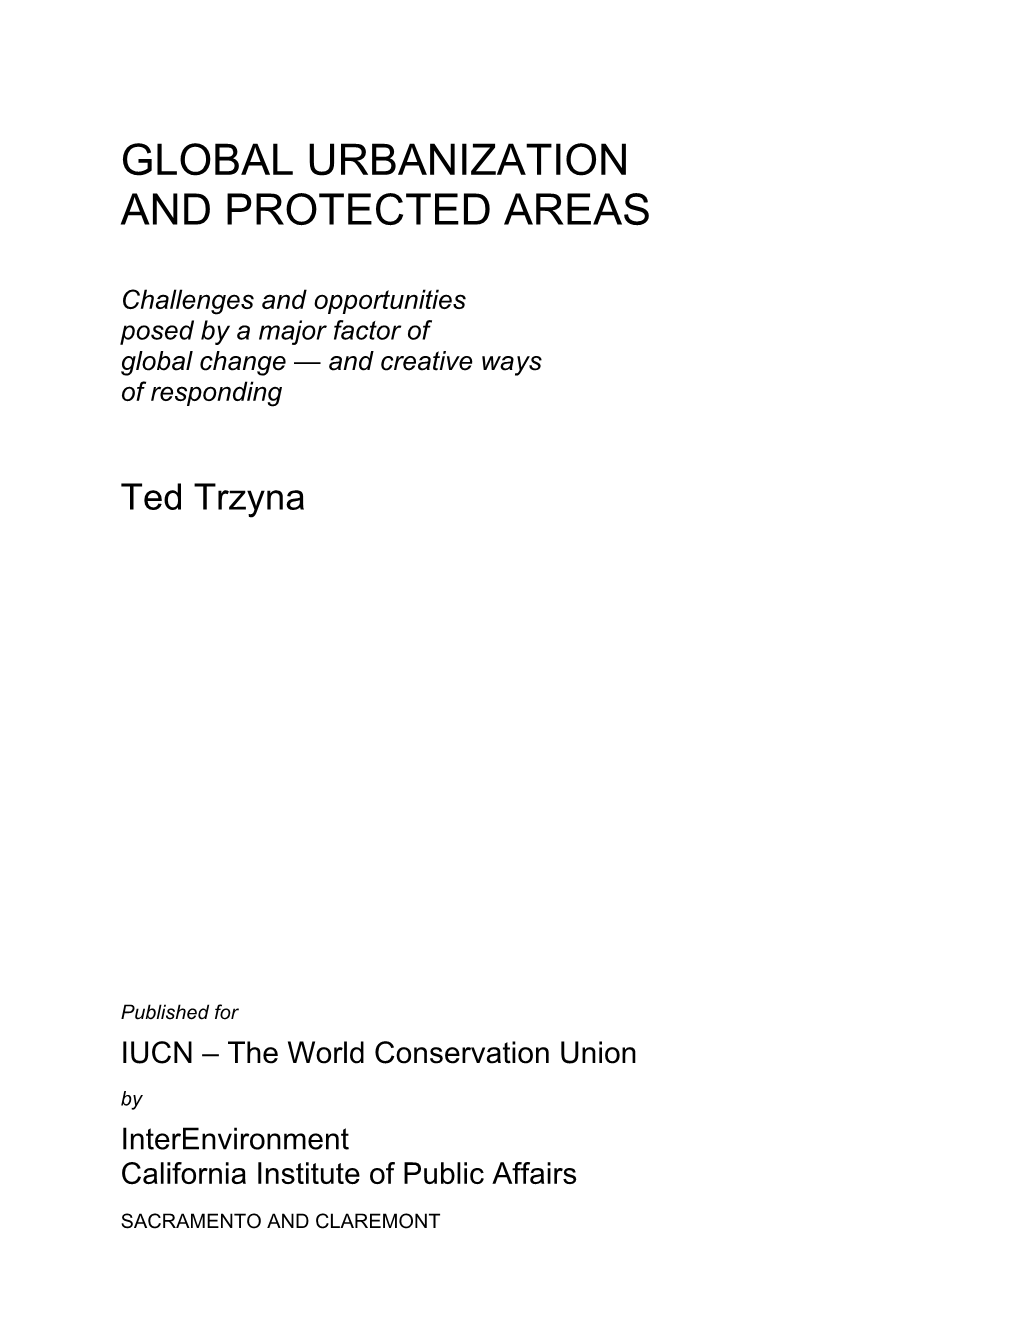 Global Urbanization and Protected Areas